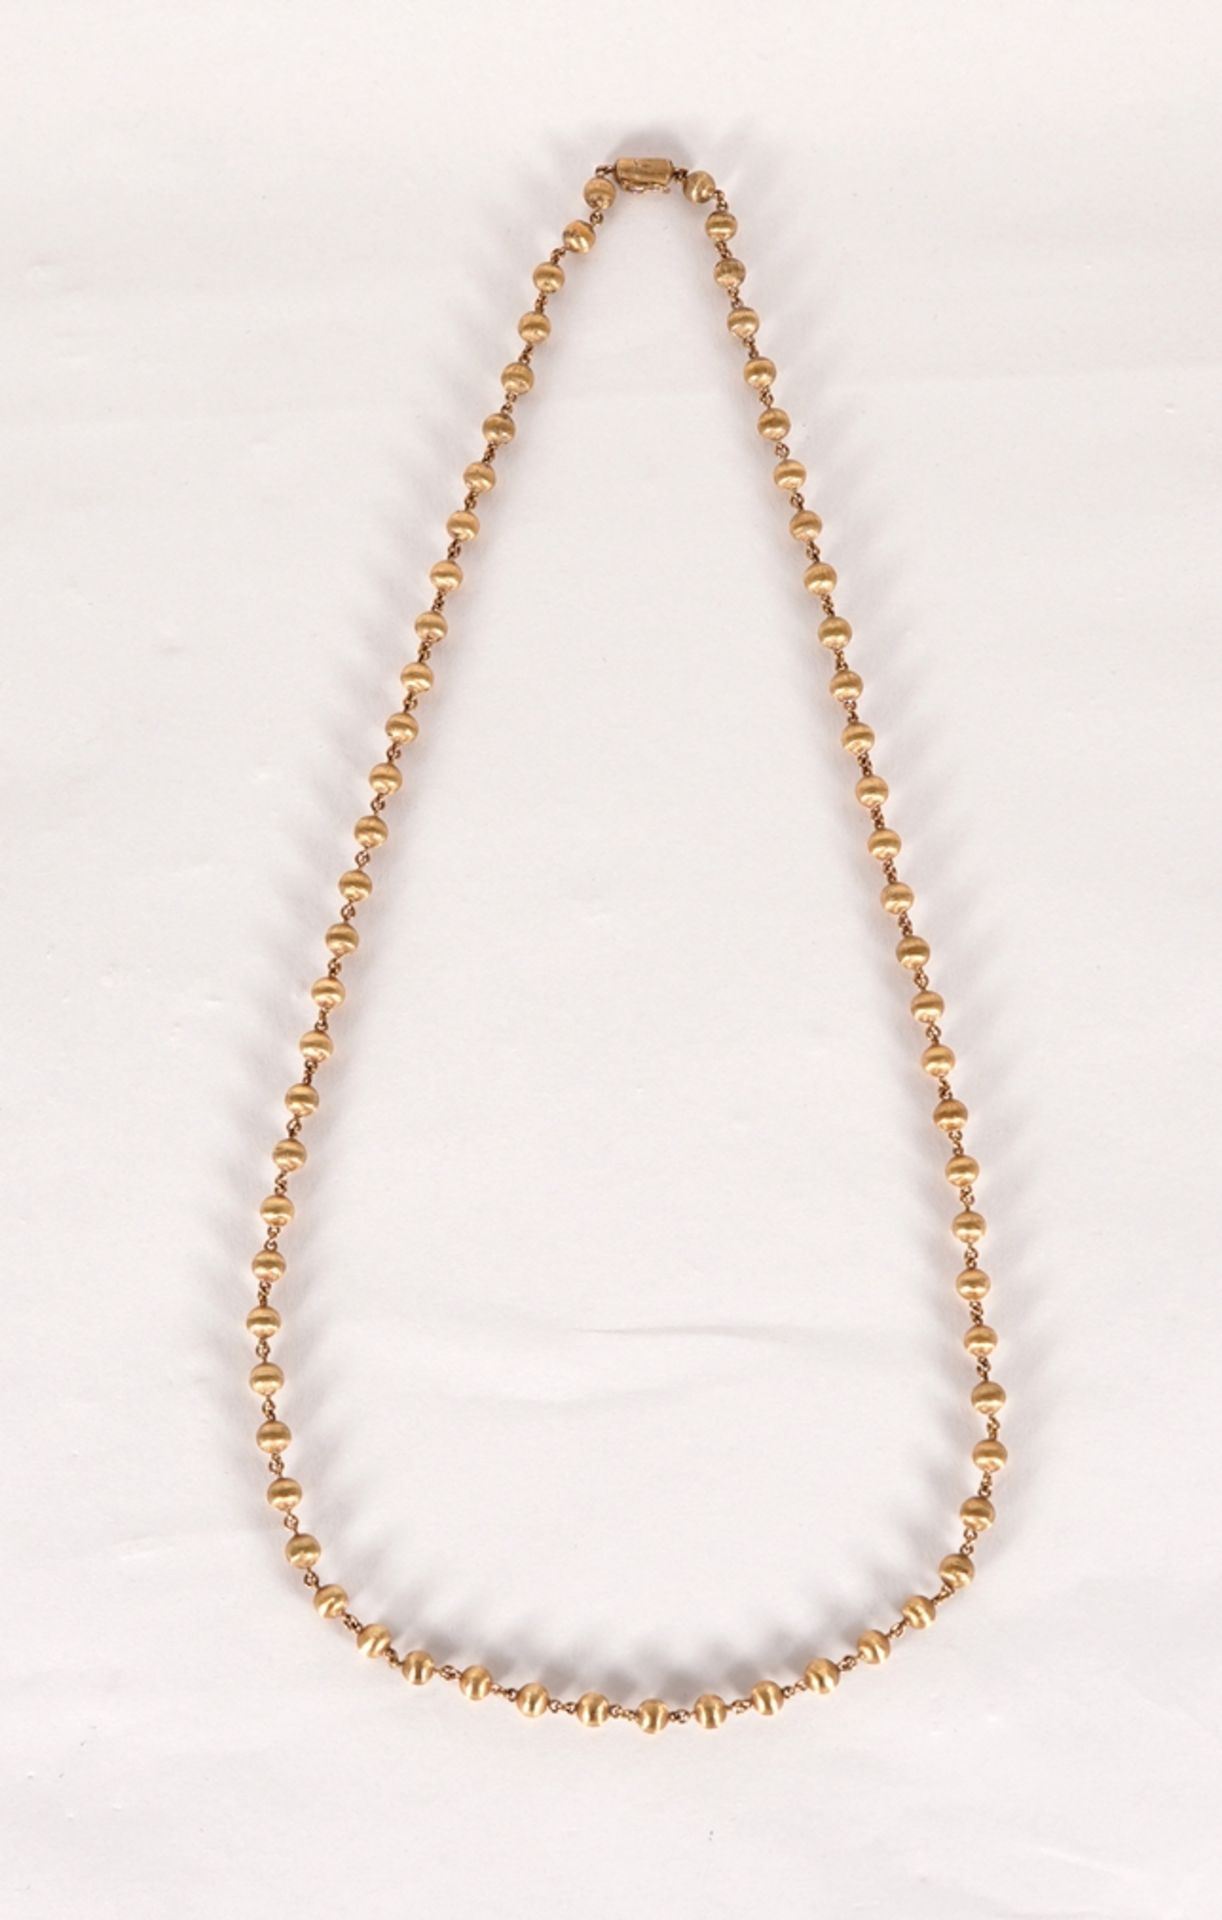 Extravagant gold necklace